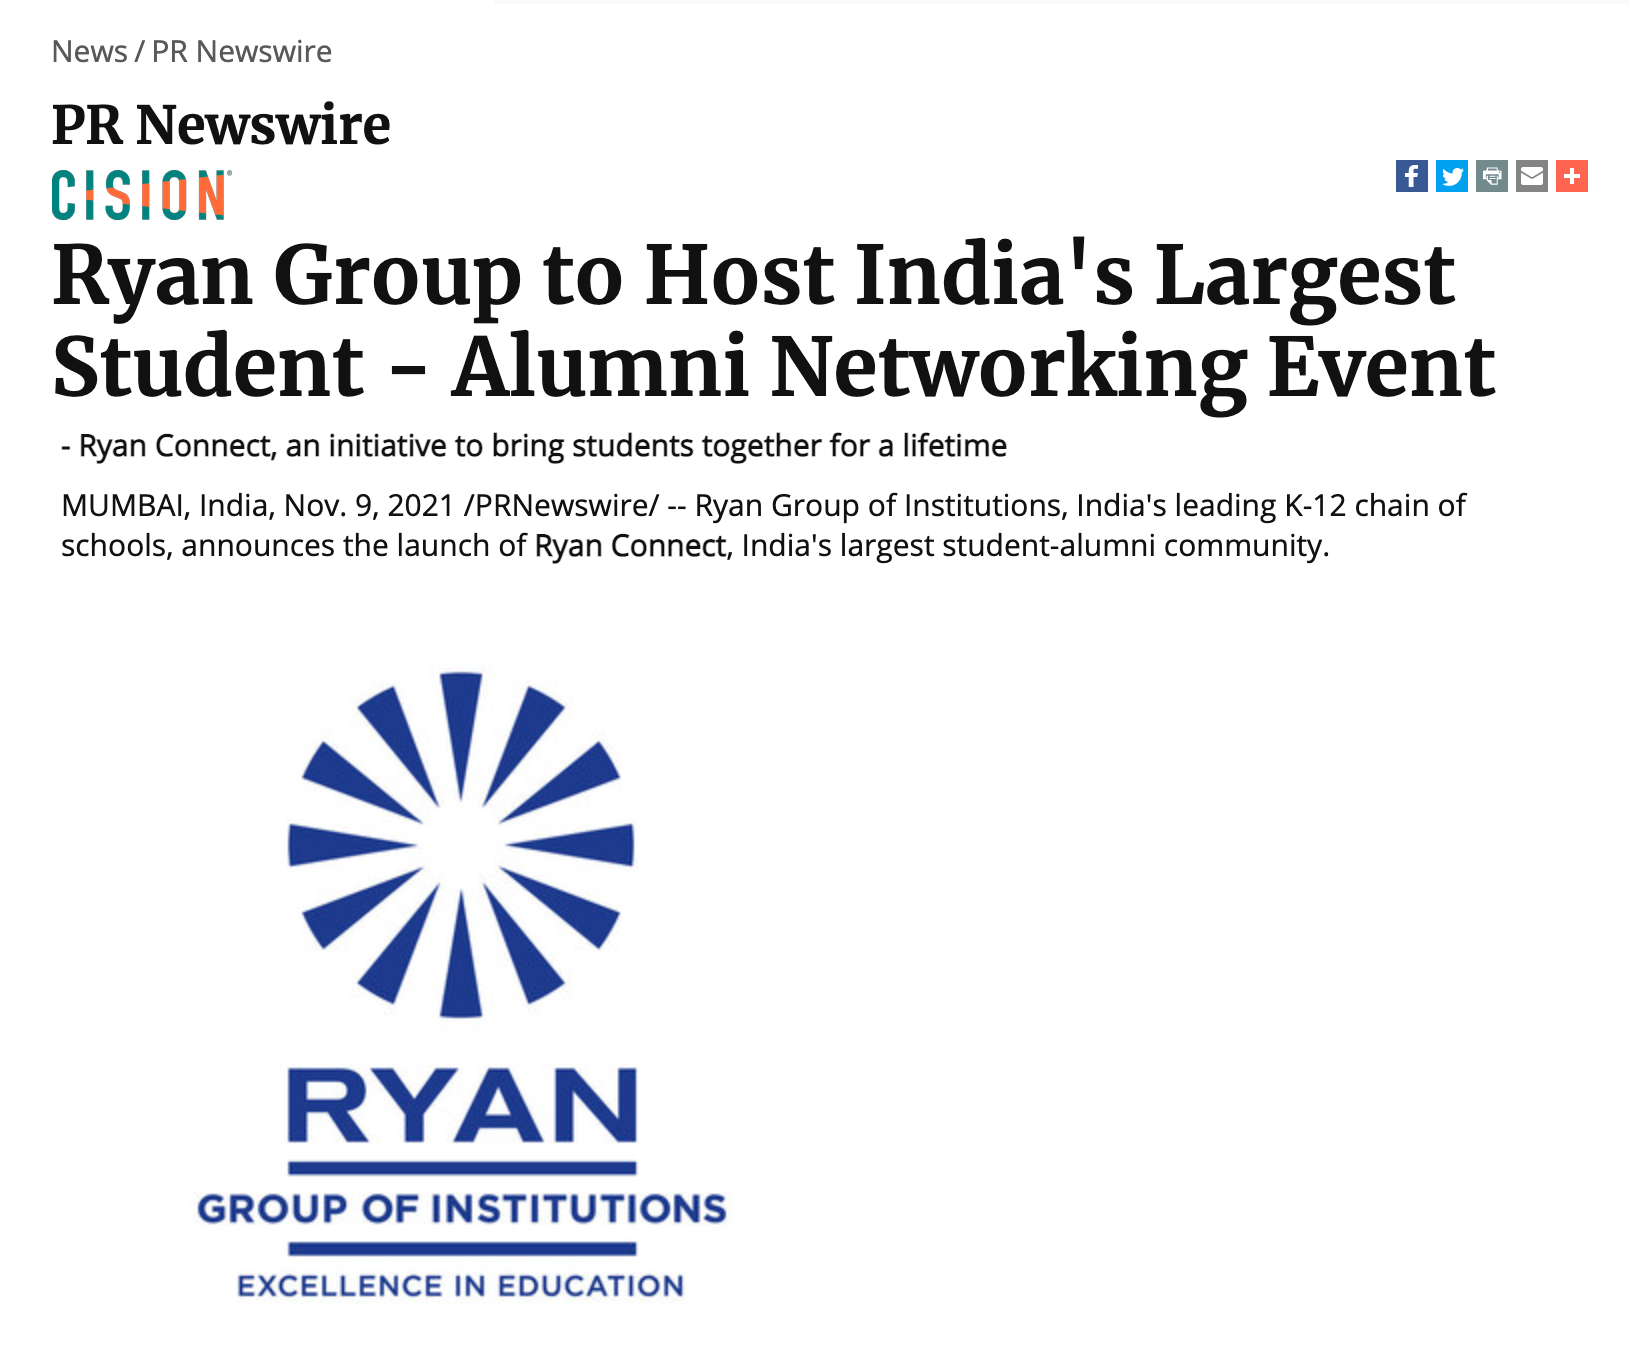 Ryan Group to Host India's Largest Student - Alumni Networking Even